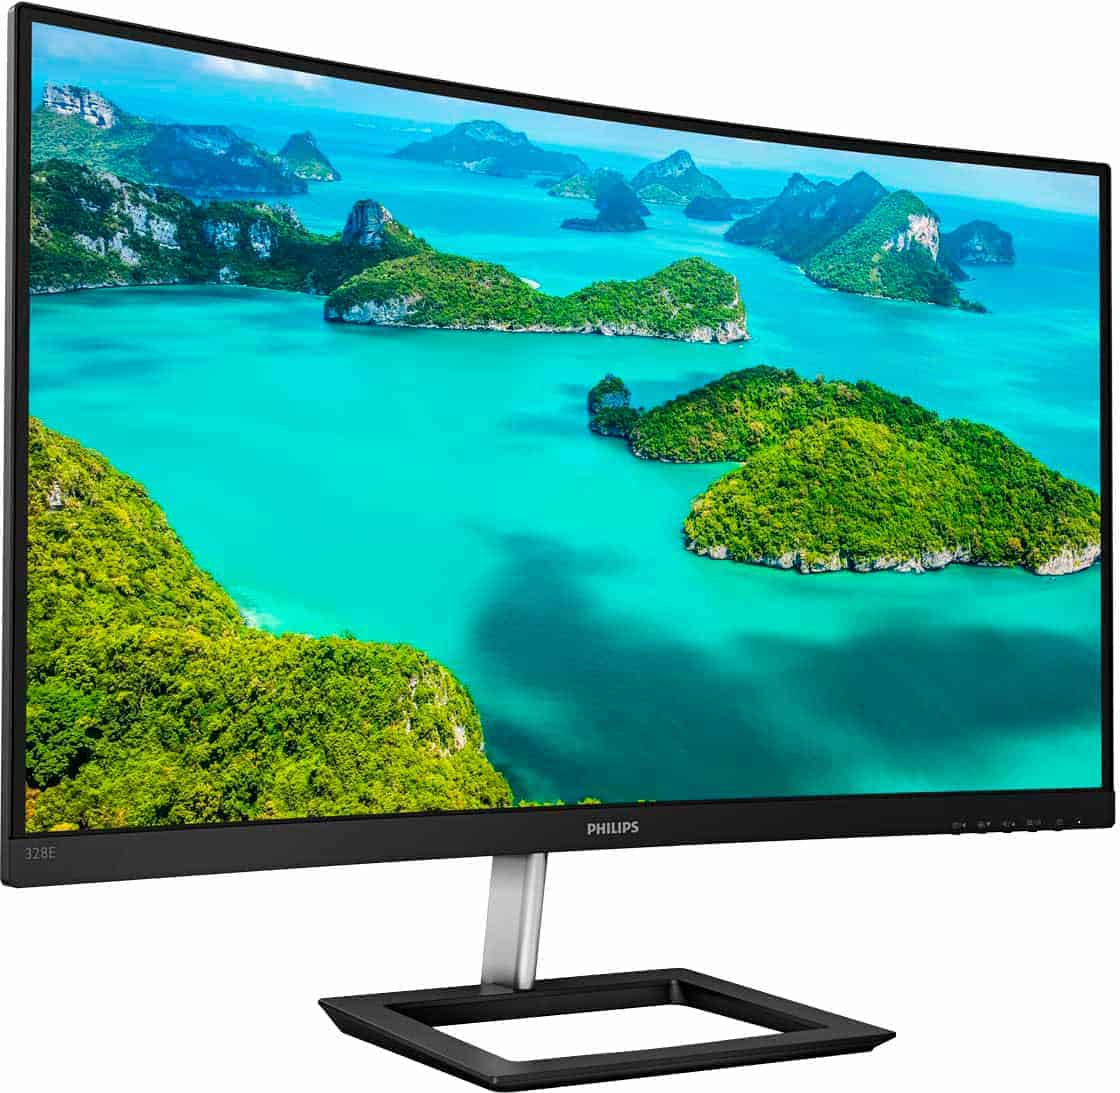 Best budget 4K monitor UHD picks for gaming, HDR, photo editing, and more